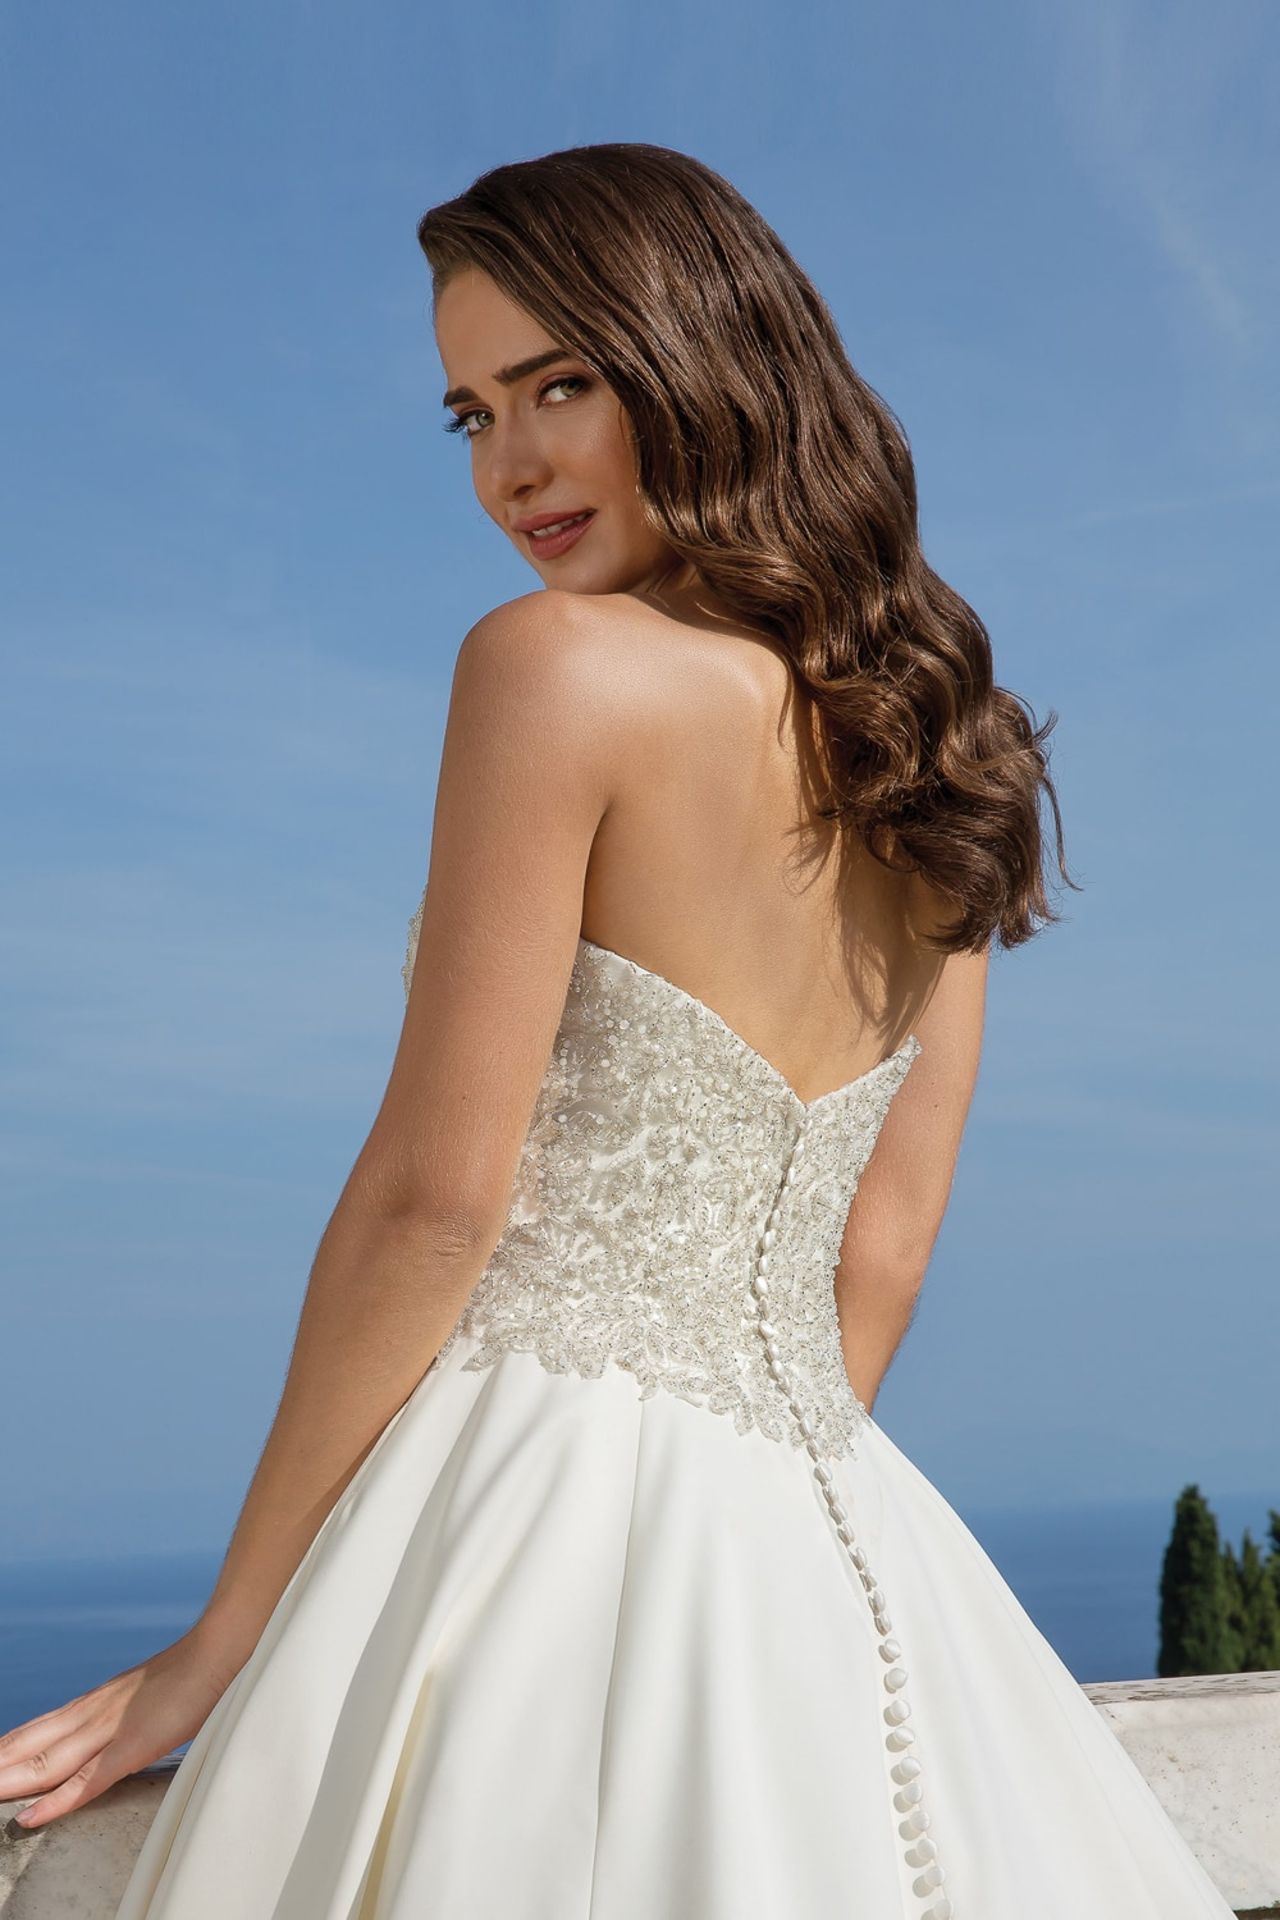 1 x Justin Alexander Strapless Wedding Dress With Allover Beaded Bodice - UK Size 14 - RRP £1,854 - Image 2 of 4